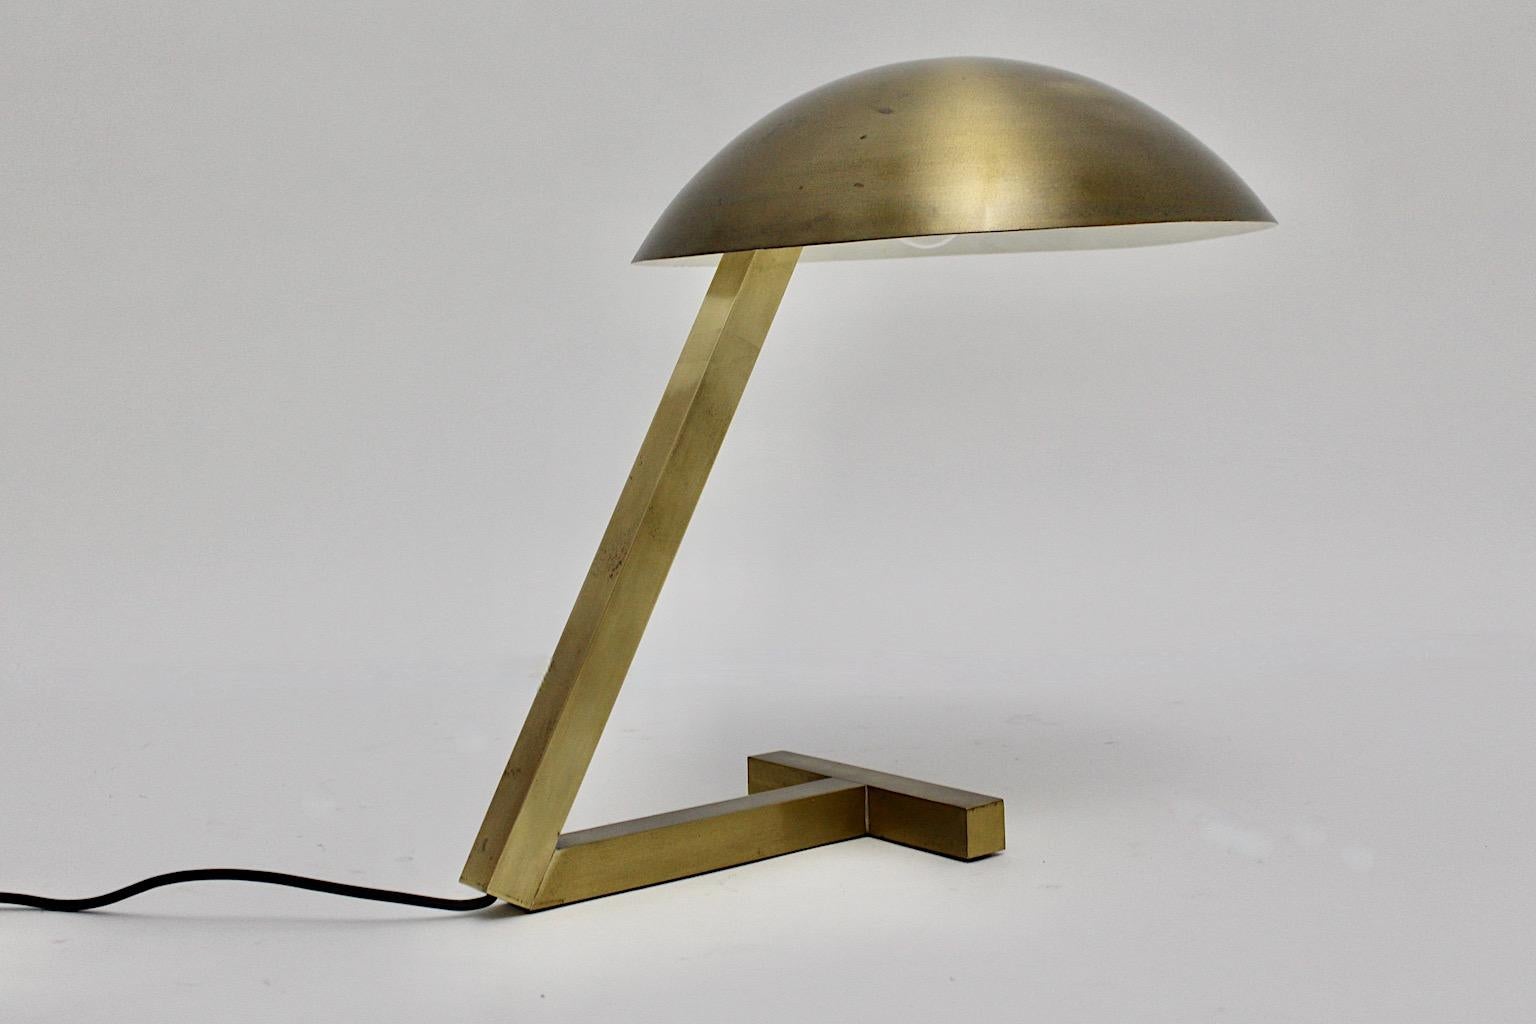 Space Age Brass Vintage Dome Geometric Table Lamp Desk Lamp 1960s Italy For Sale 7